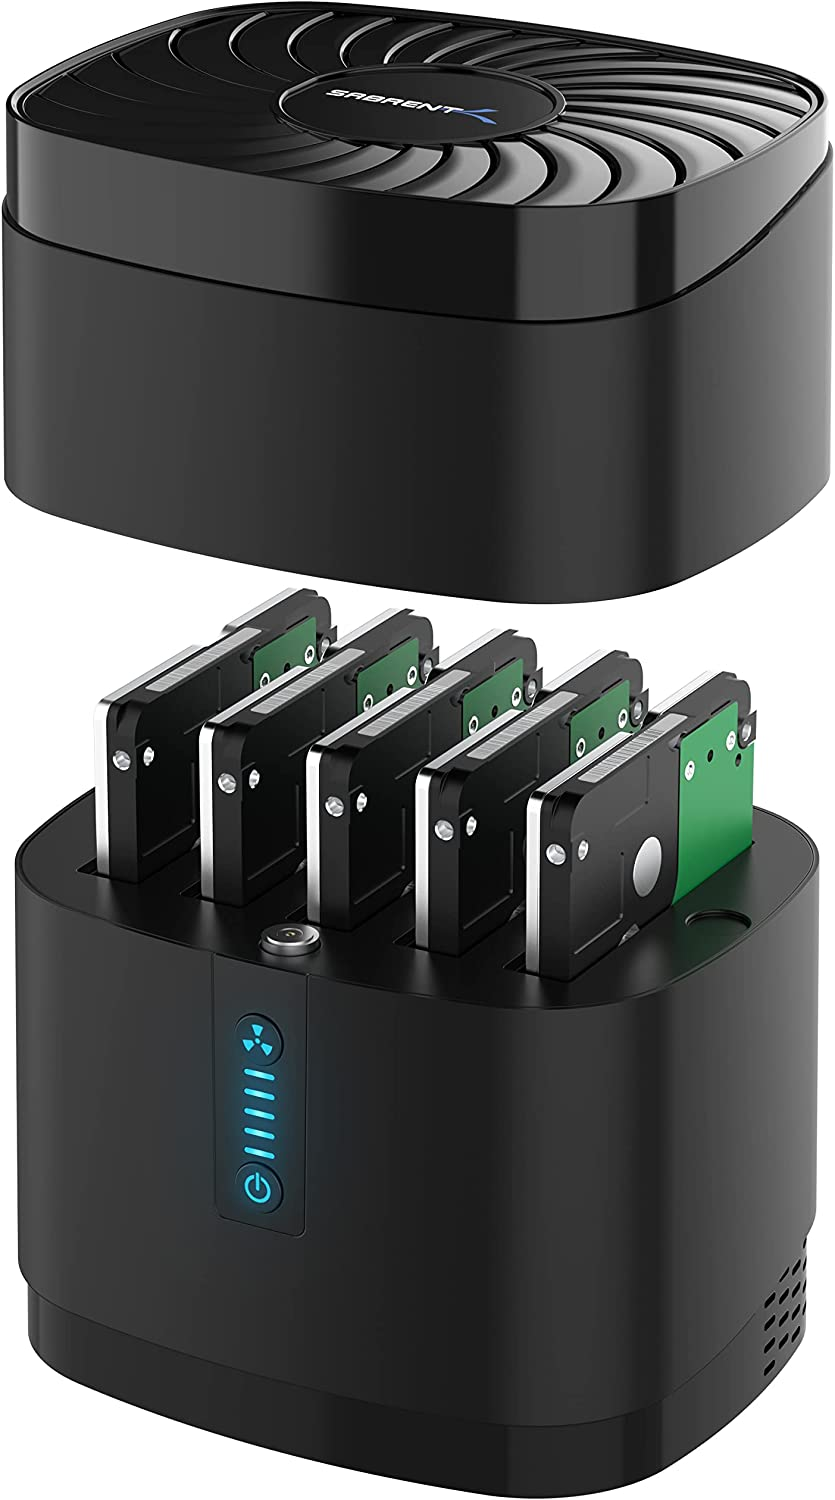 SABRENT 5-Bay USB 3 RAID Docking Station for 2.5” SATA HDDs and SSDs (DS-5RSS)